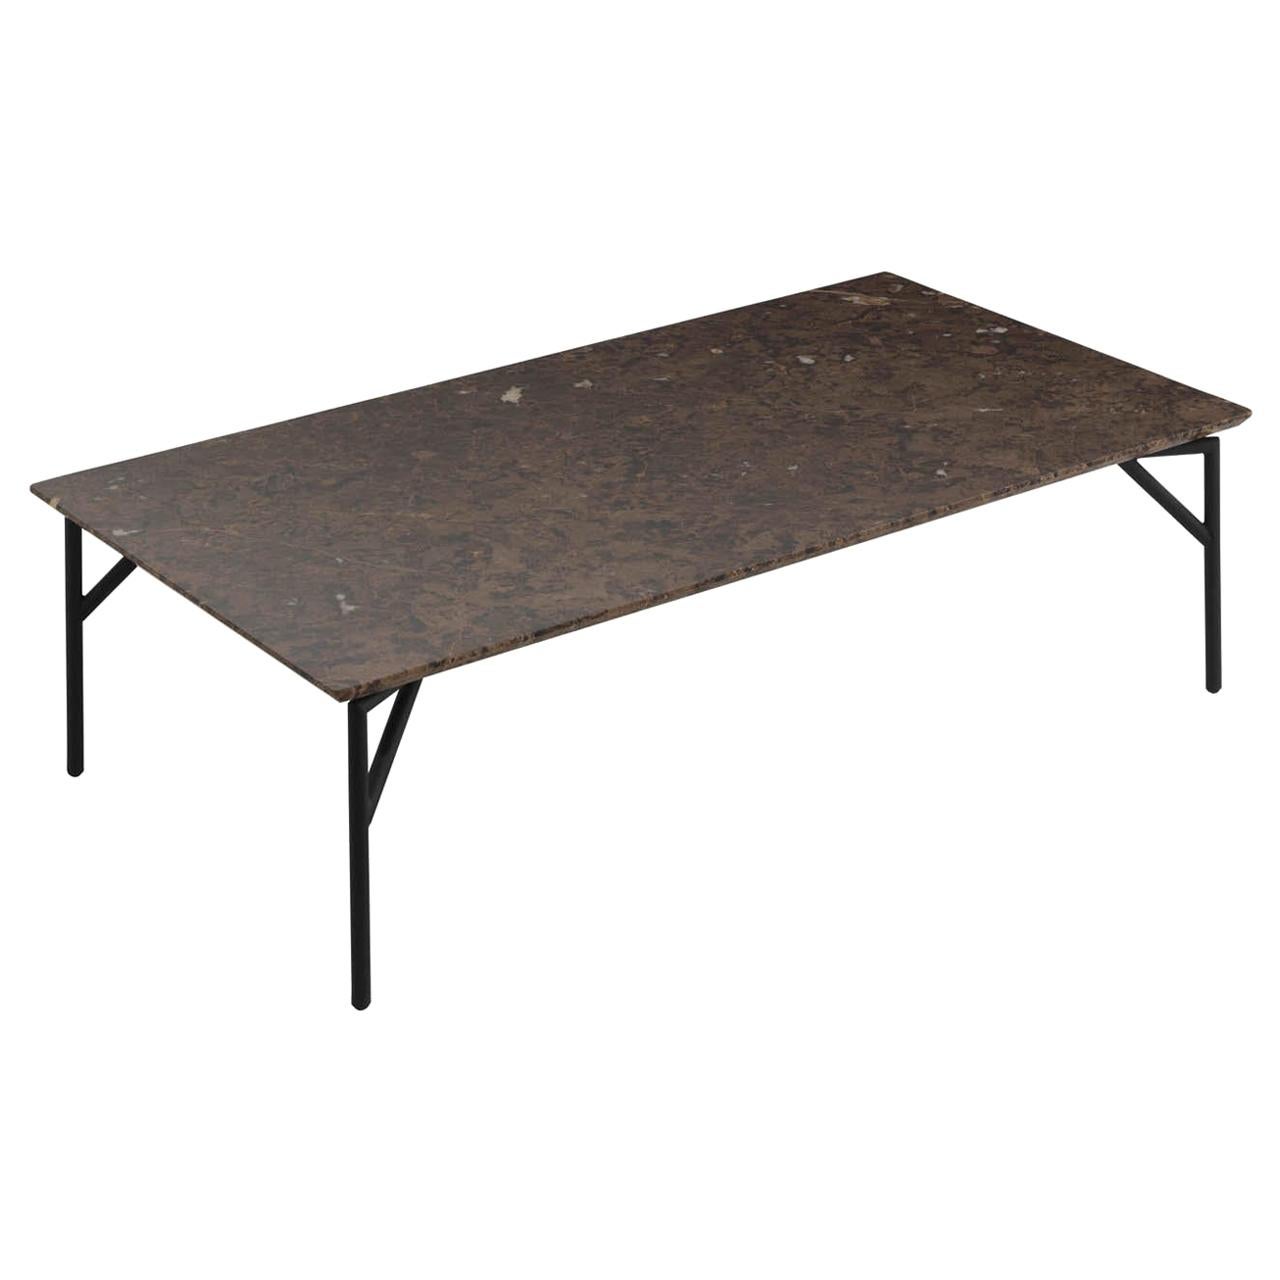 Tout Le Jour Coffee Table with Emperador Marble Top by Marc Thorpe For Sale